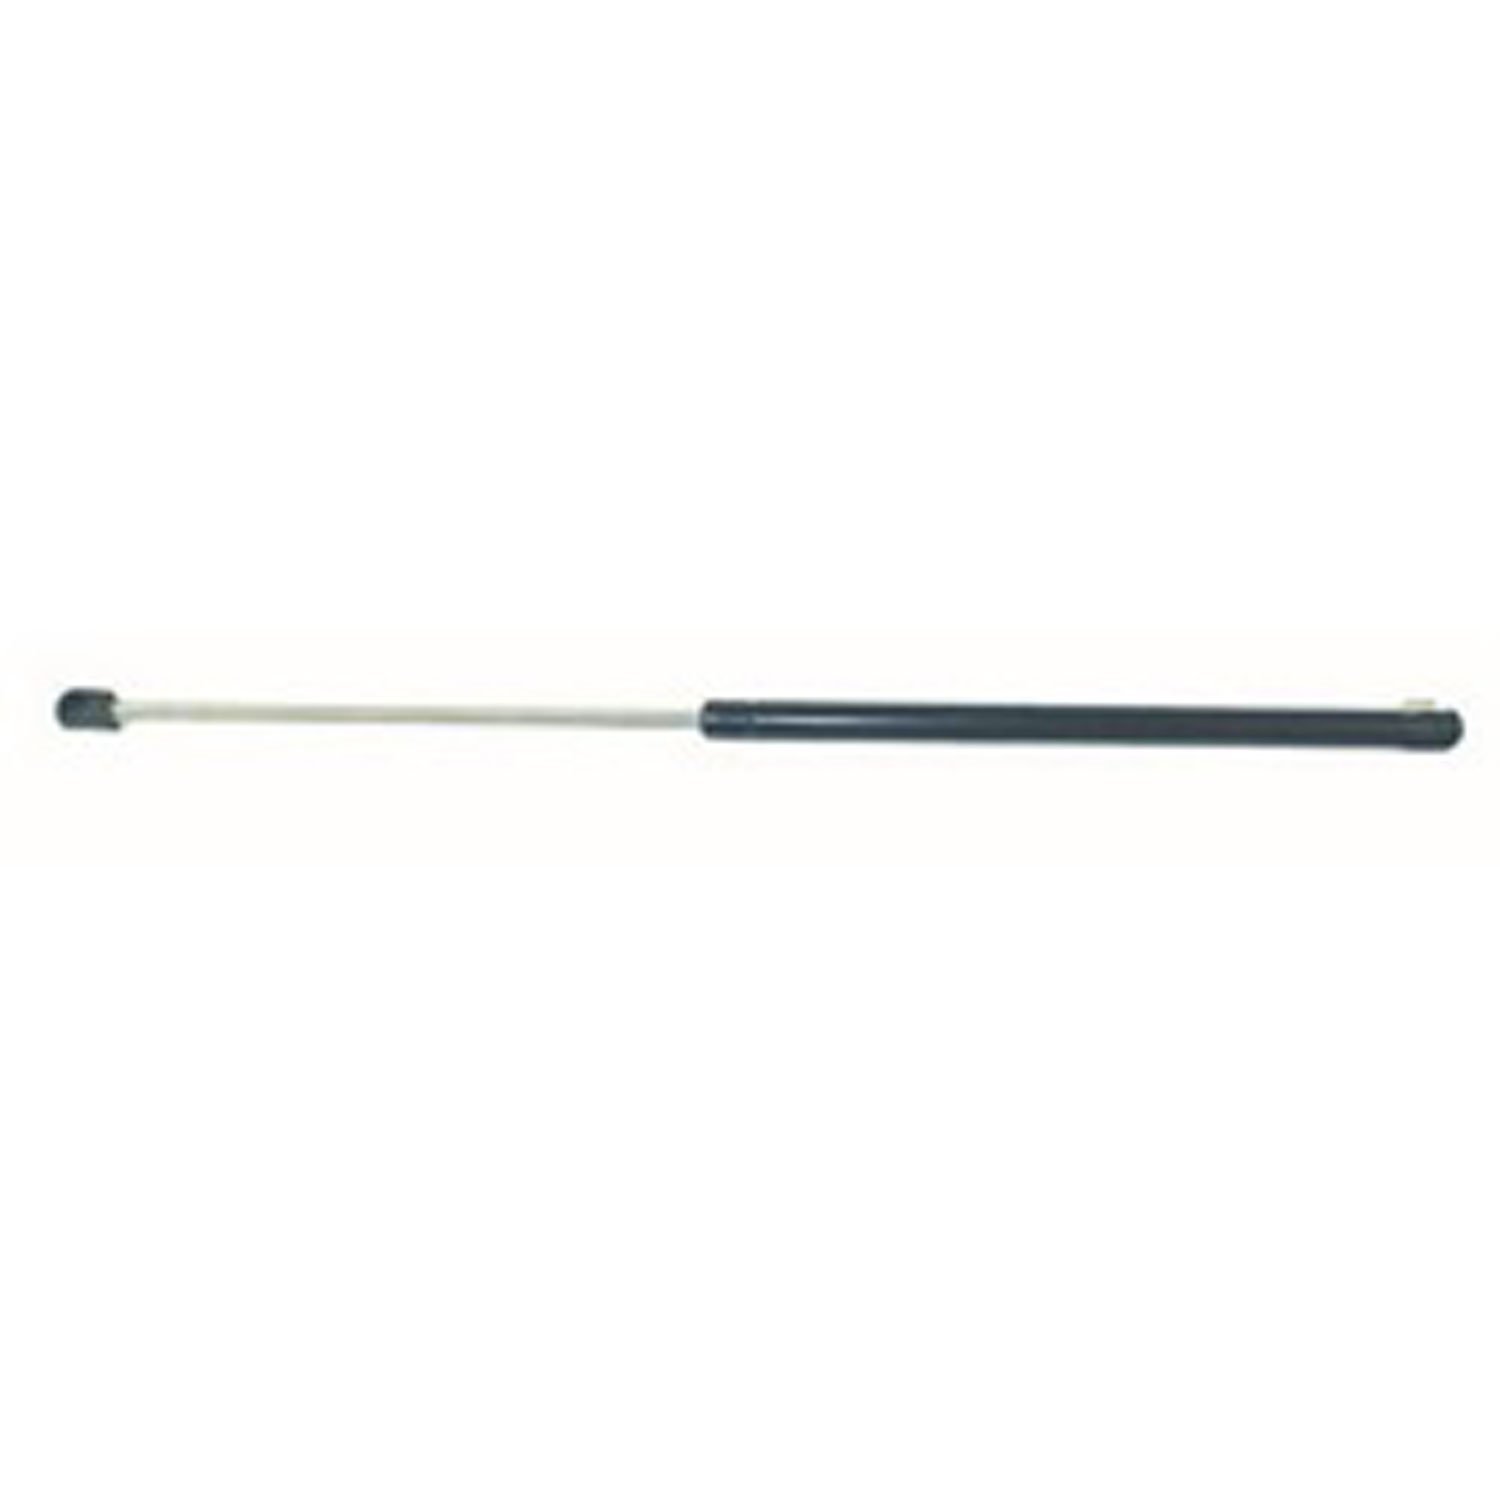 Replacement gas strut from Omix-ADA, Fits hardtop liftgate